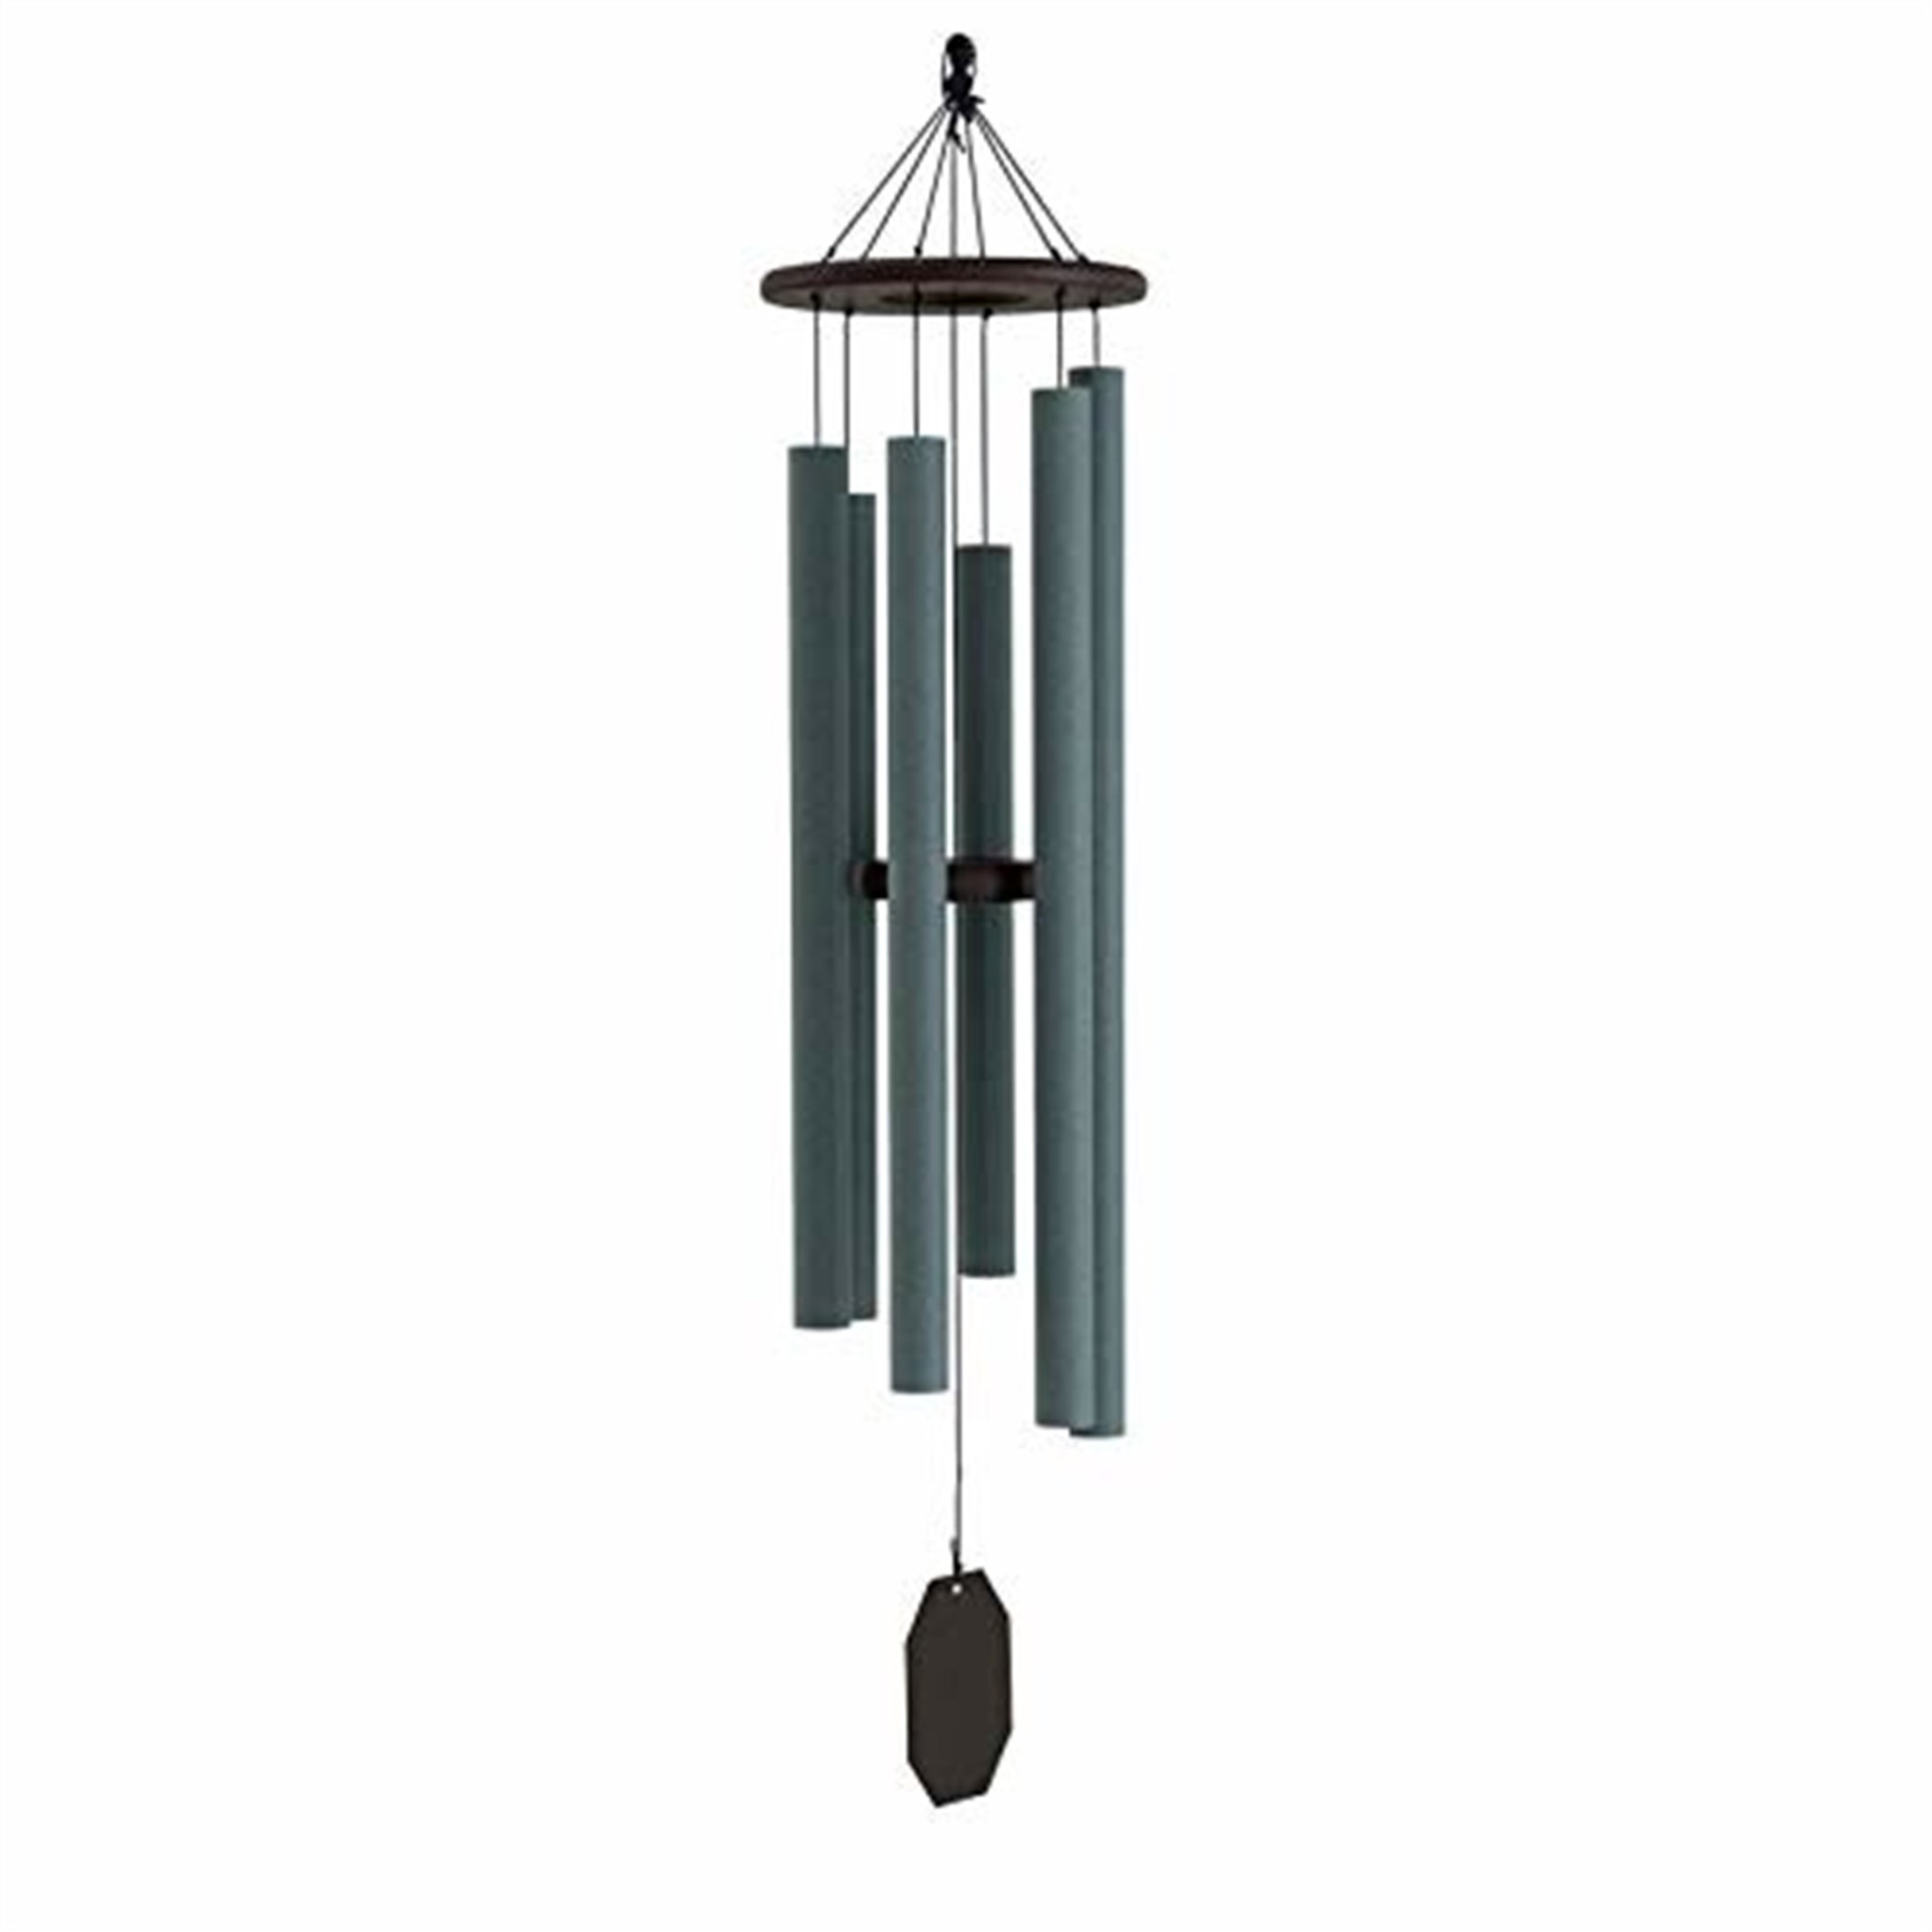 Lambright Chimes Serenity Wind Chime - Amish Handcrafted Country Chime, 48"